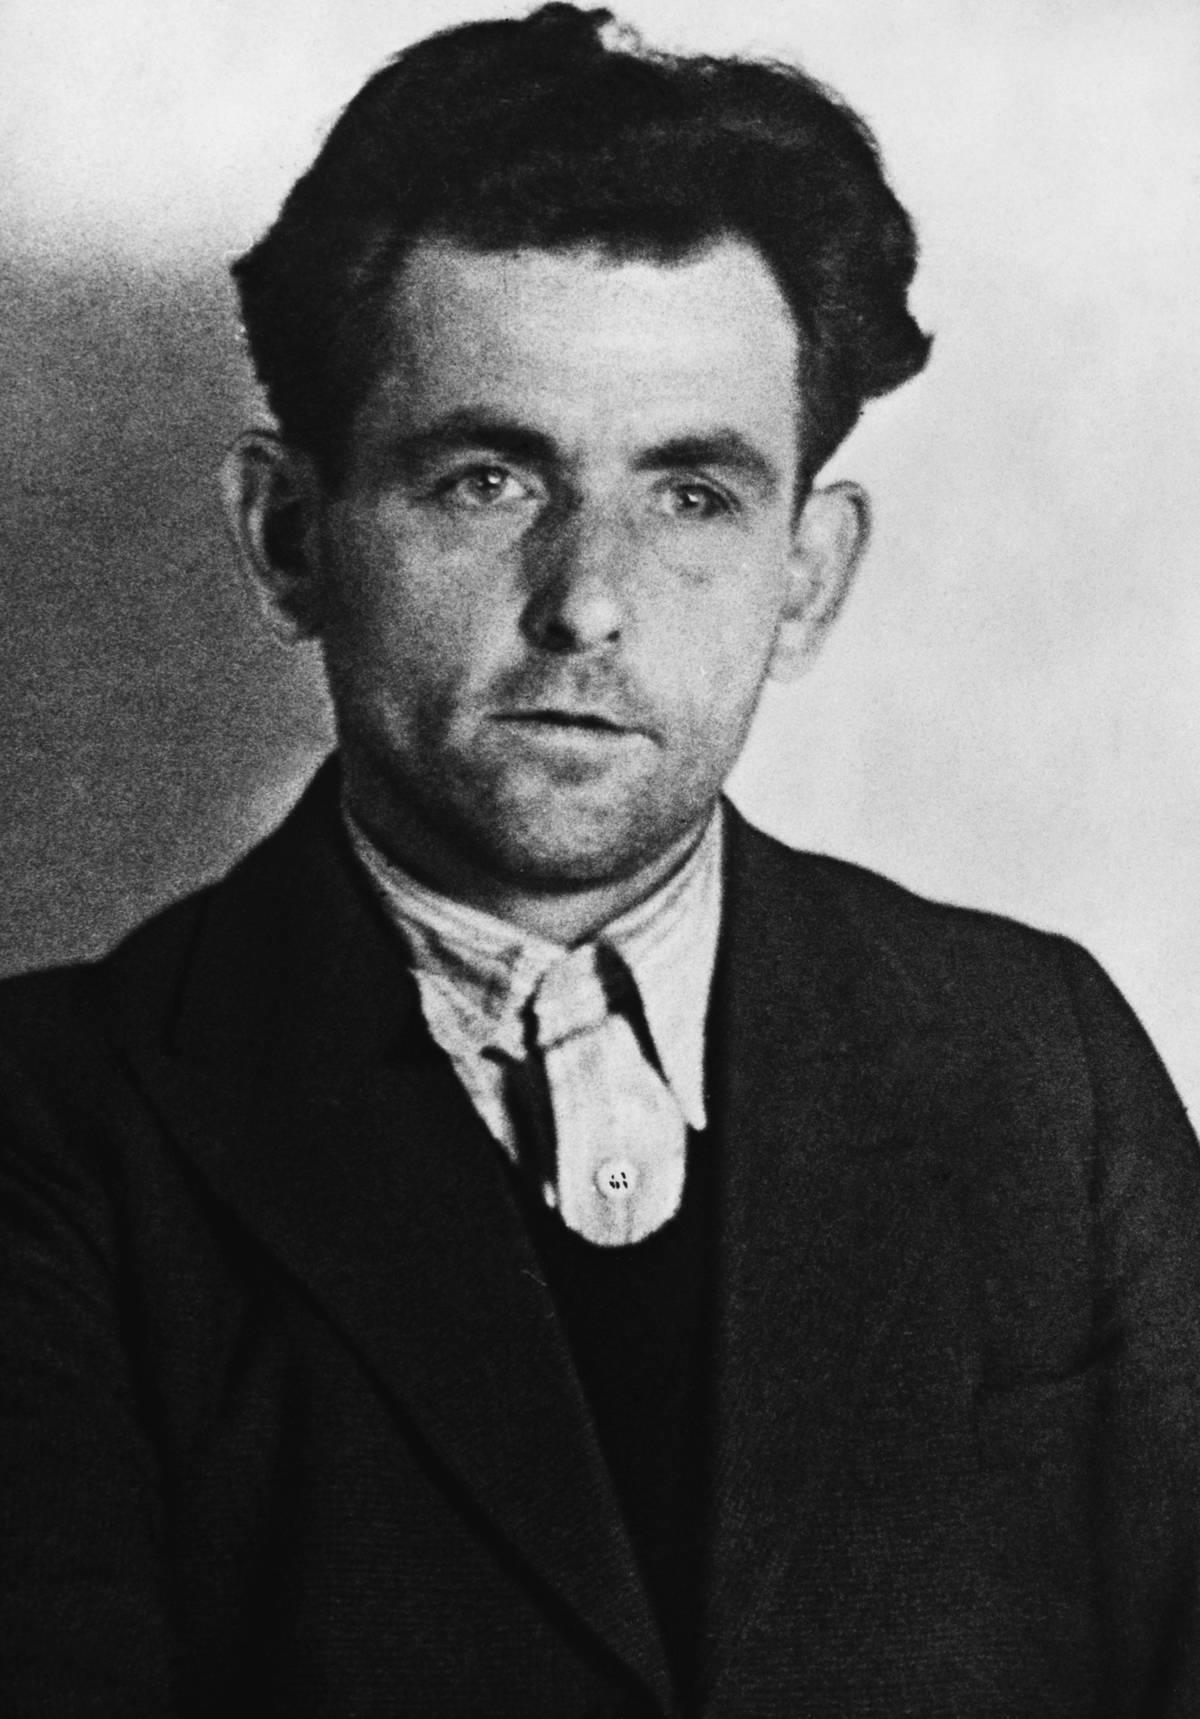 <p>George Elser, a German carpenter, attempted to assassinate Hitler and other German Officers at the Burgerbraukeller in Munich on November 8, 1939.</p> <p>Elser's weapon killed eight and injured 62 but did not kill Hitler because he had left early. Once soldiers found Elser, he was placed in Dachau concentration camp, where he stayed for five years until he was executed.</p>